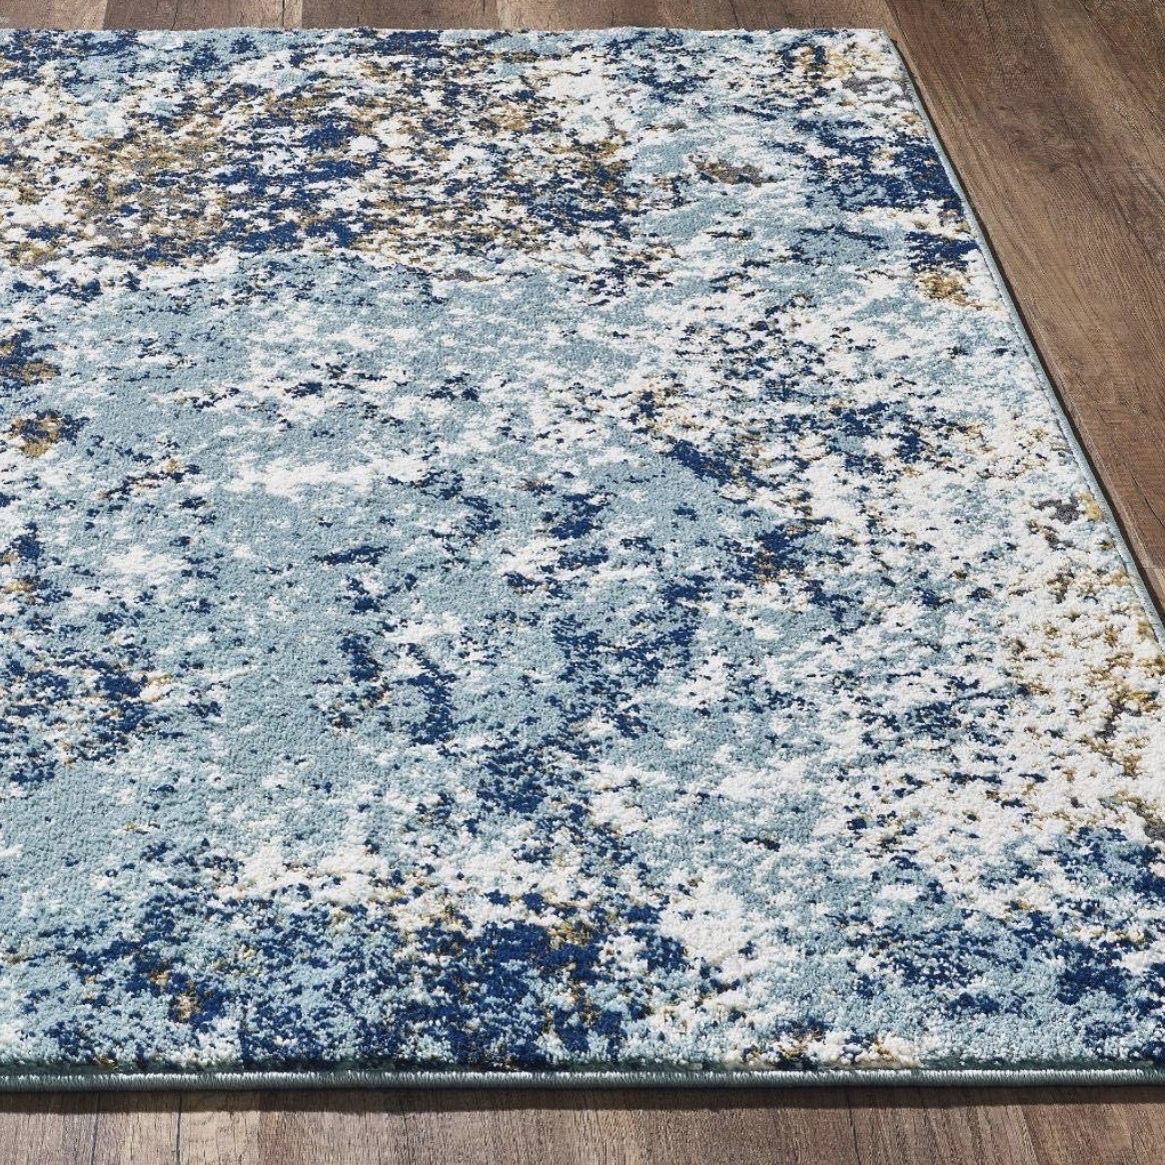 9x12 Rug-only 6 Months Only. Multi-Colored